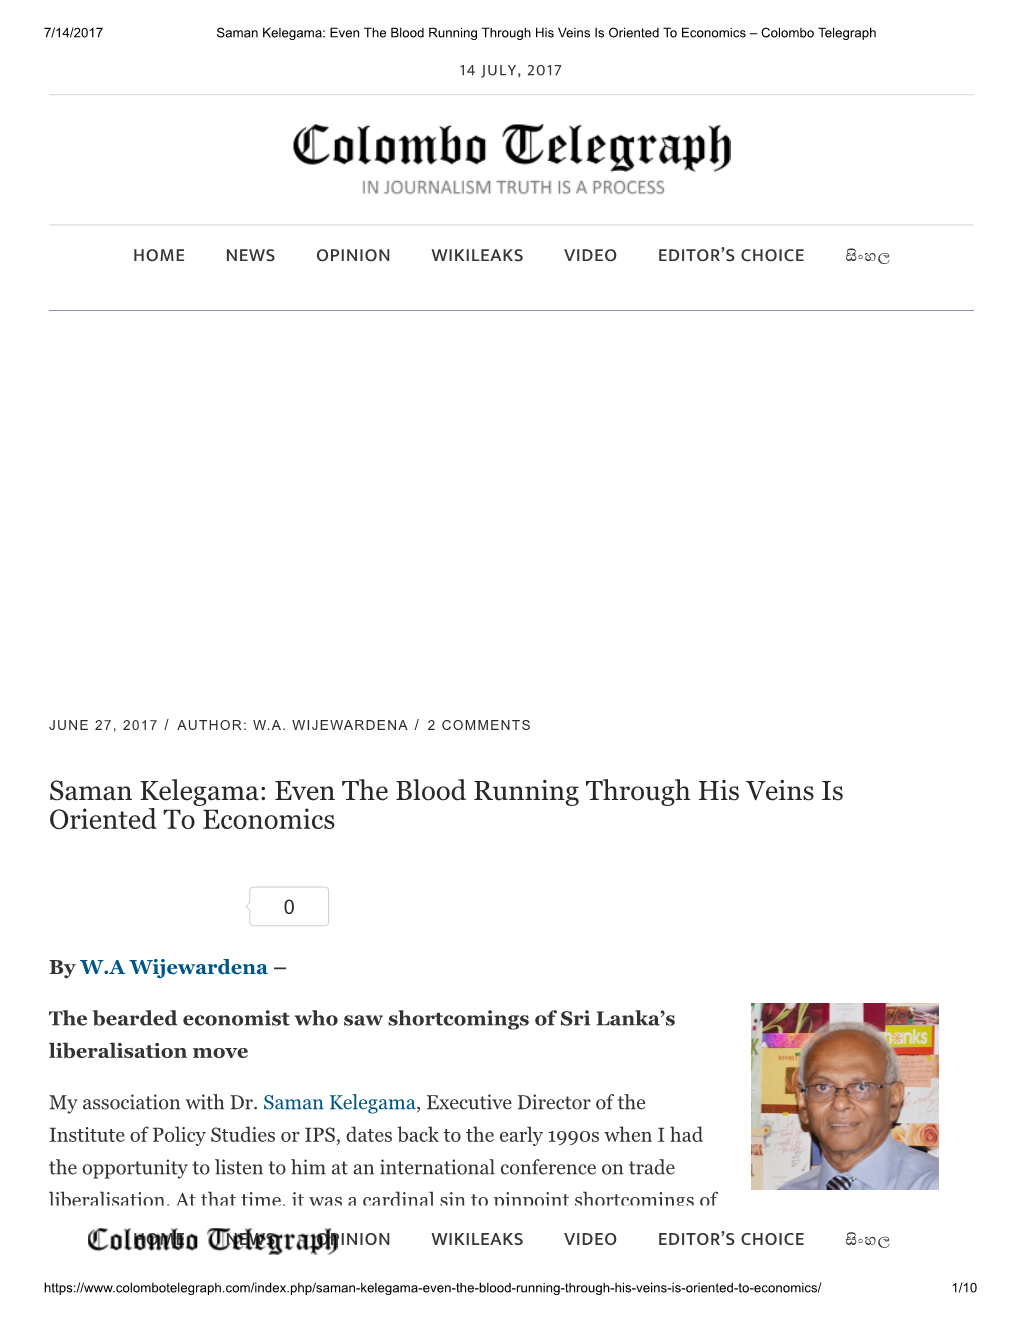 Saman Kelegama: Even the Blood Running Through His Veins Is Oriented to Economics – Colombo Telegraph